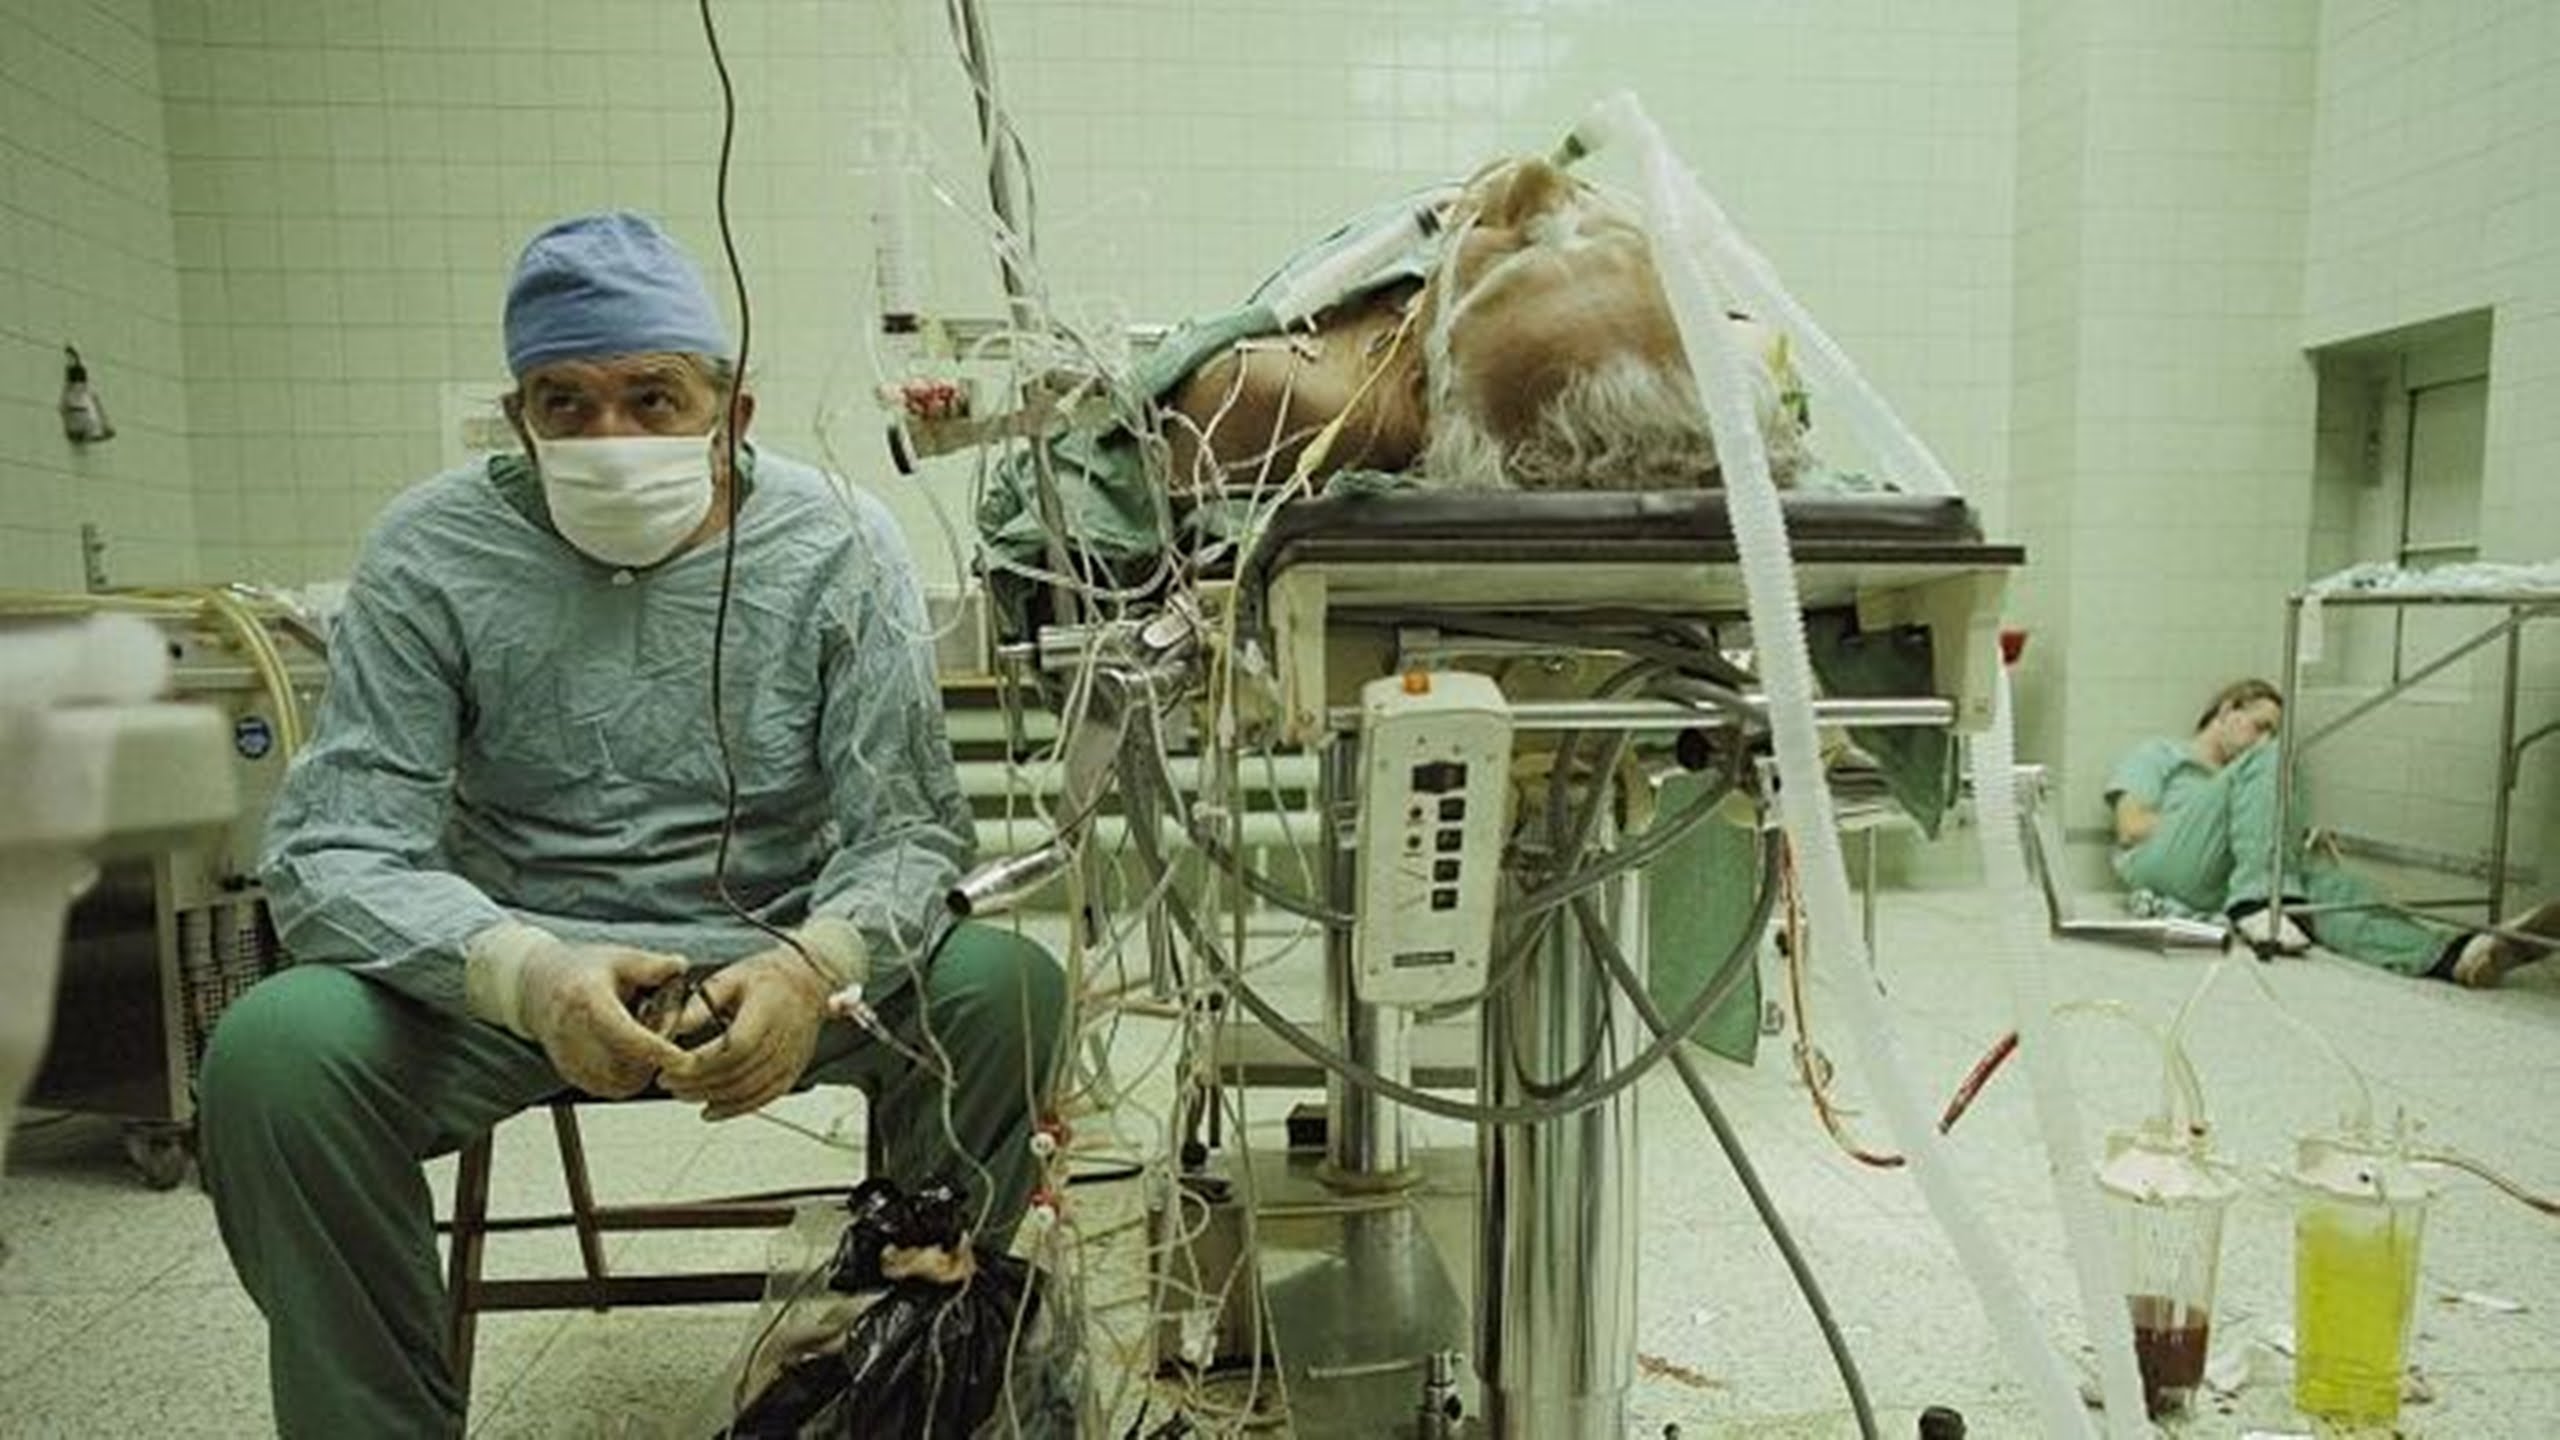 Anxious Eyes -  Taken by James Stanfield in Poland, 1987, this picture depicts cardiac surgeon Zbigniew Religa tracking the vitals of a patient after a successful heart transplant while his assistant rests in the corner. The surgery had taken 23 hours and had used very outdated equipment.